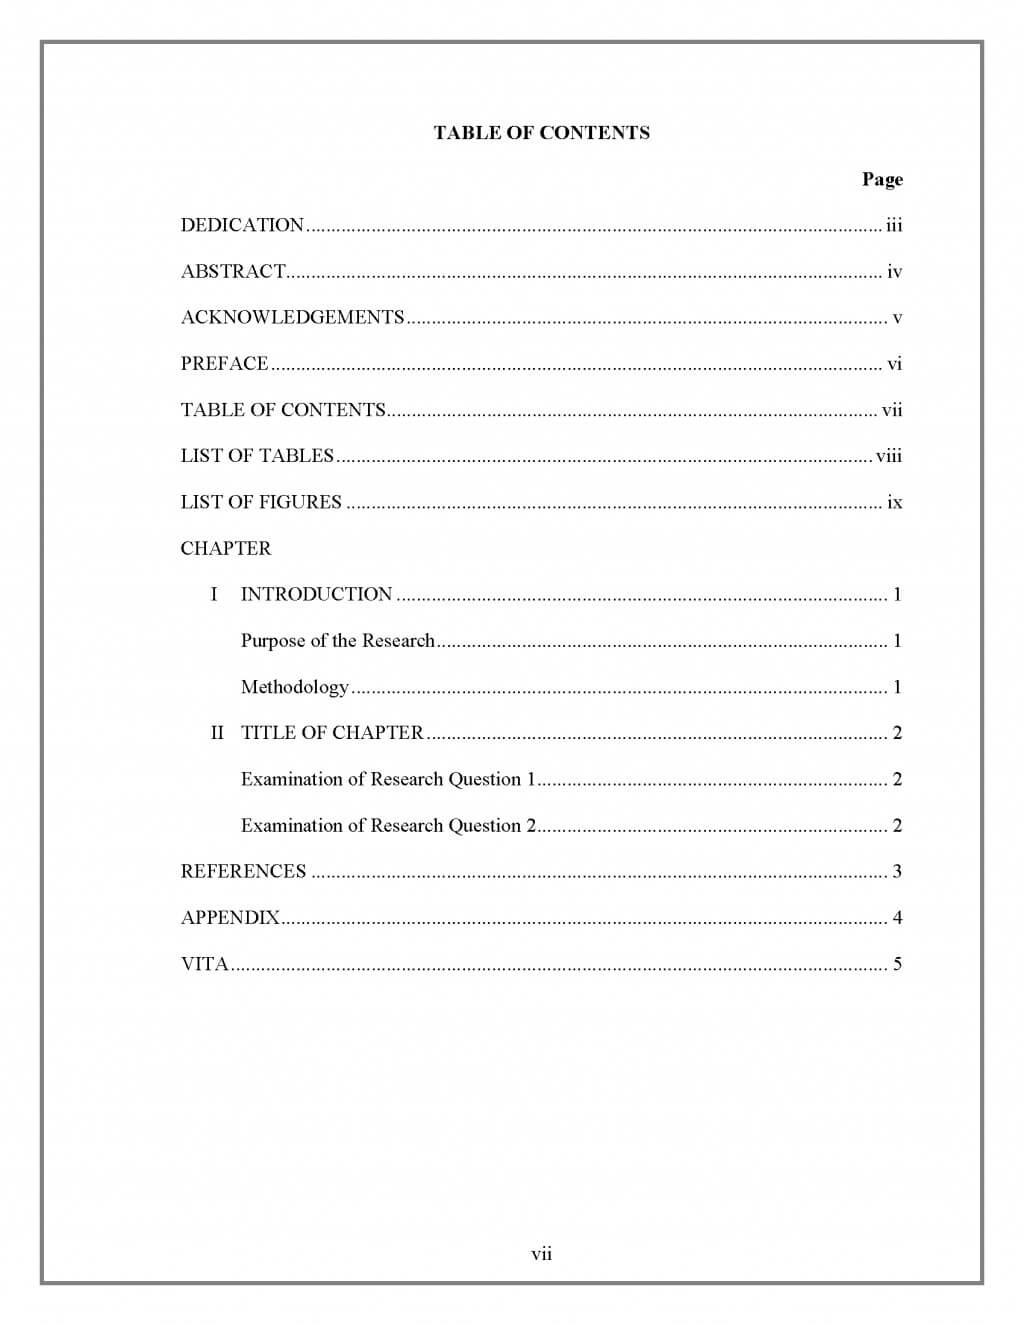 Apa Table Of Contents Template - Ironi.celikdemirsan Intended For Apa Research Paper Template Word 2010